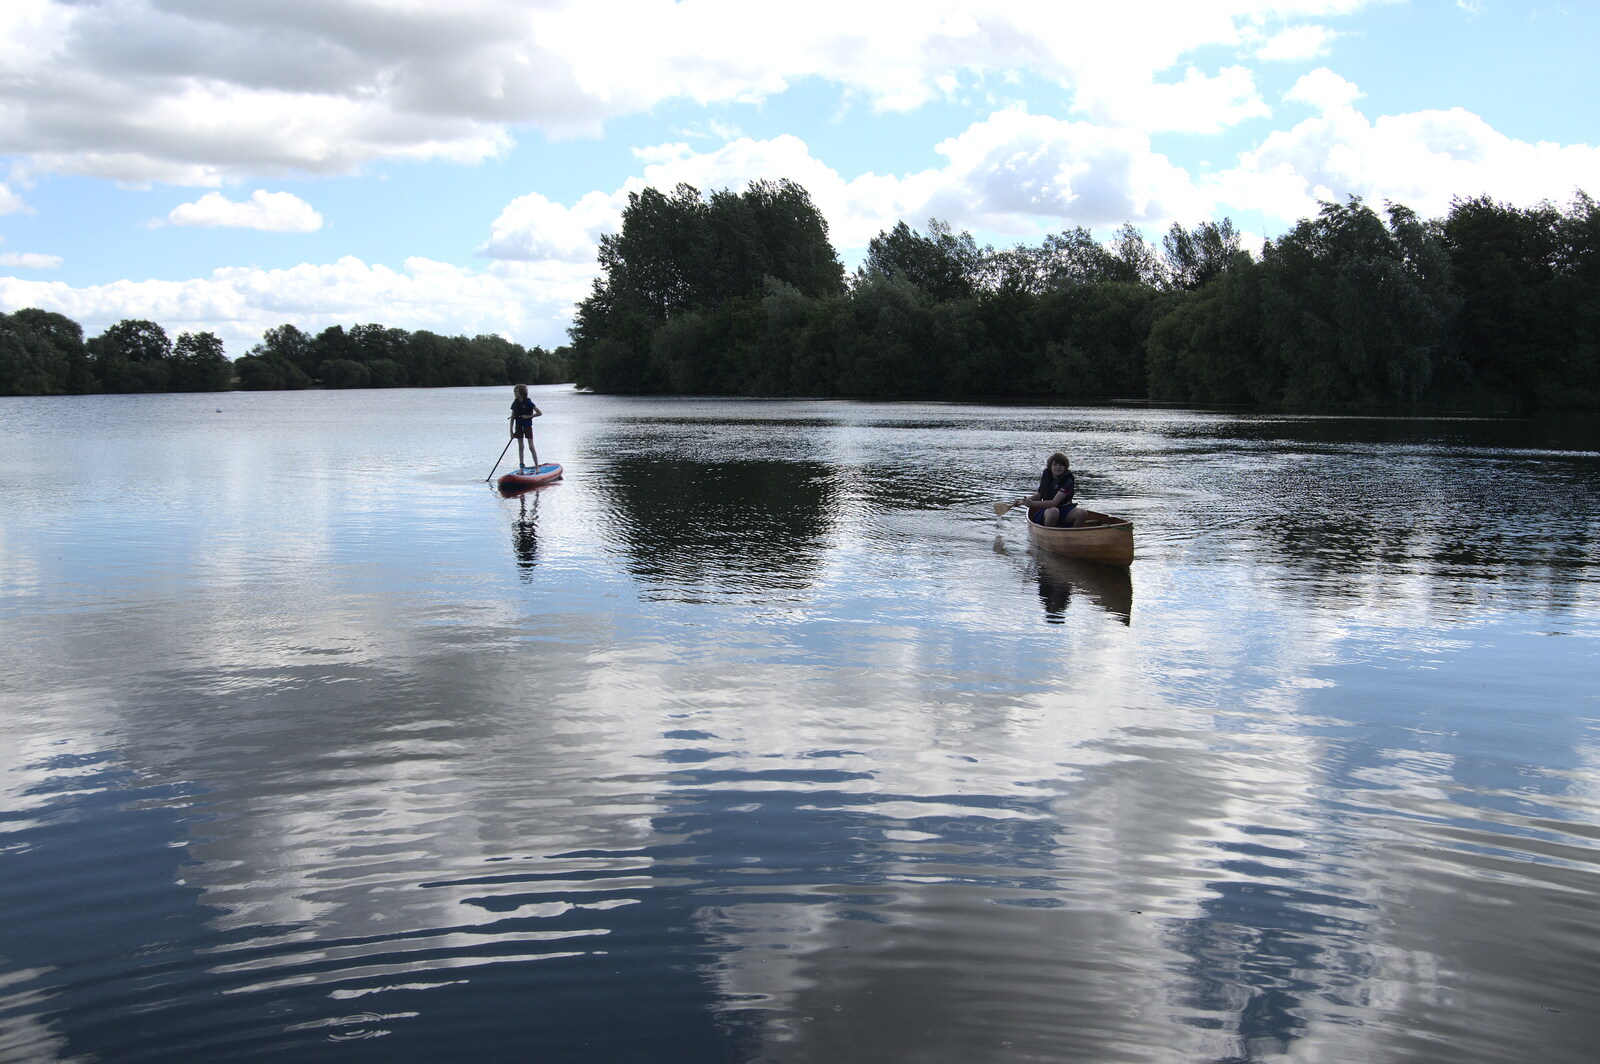 The boys out on the lake from Camping at the Lake, Weybread, Harleston - 25th June 2022